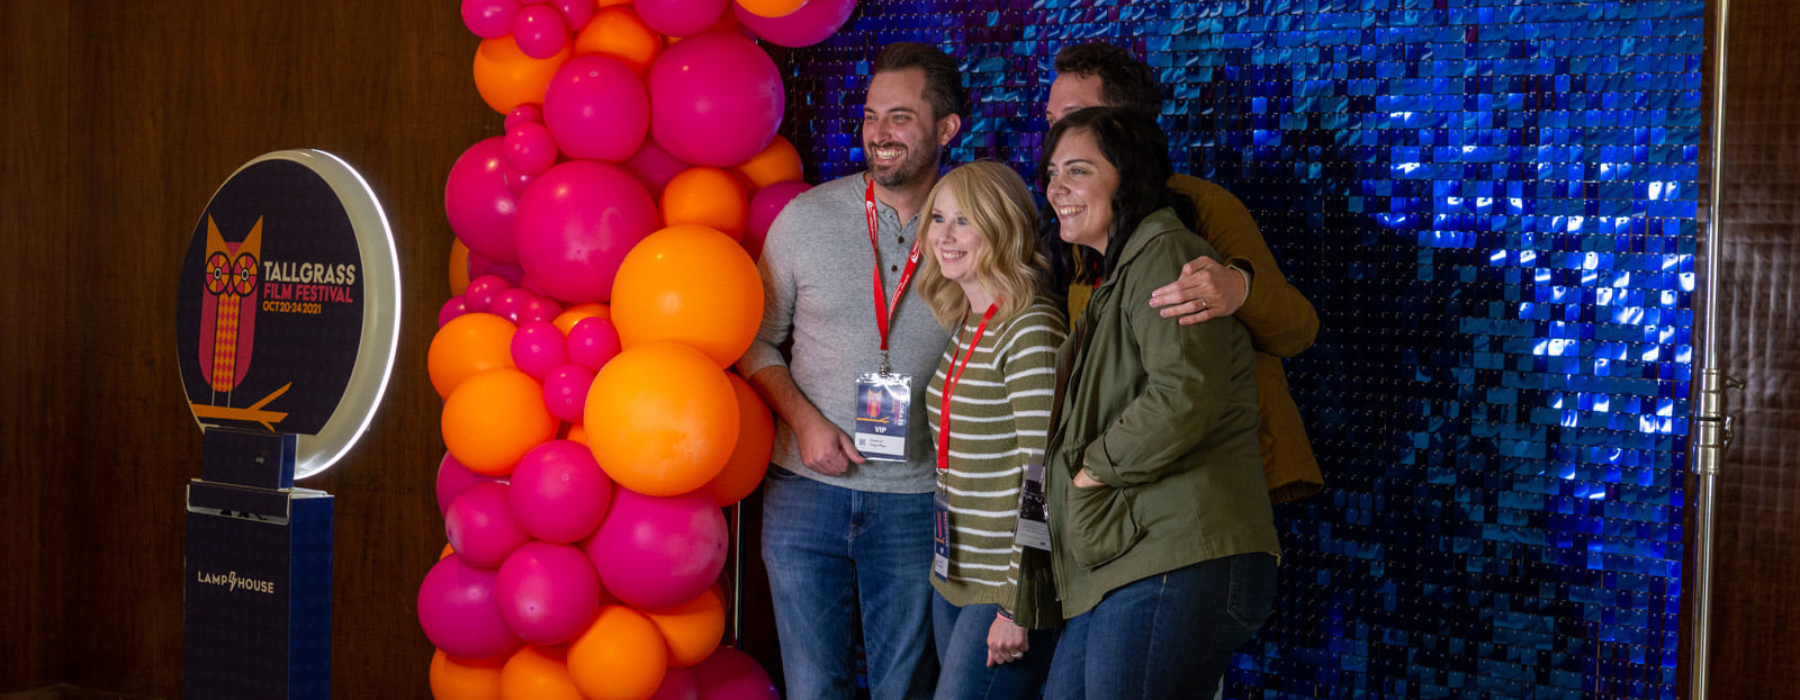 Four people take a picture at a photo booth, there is a orange and pink balloon arch beside them and a shiny blue background behind them